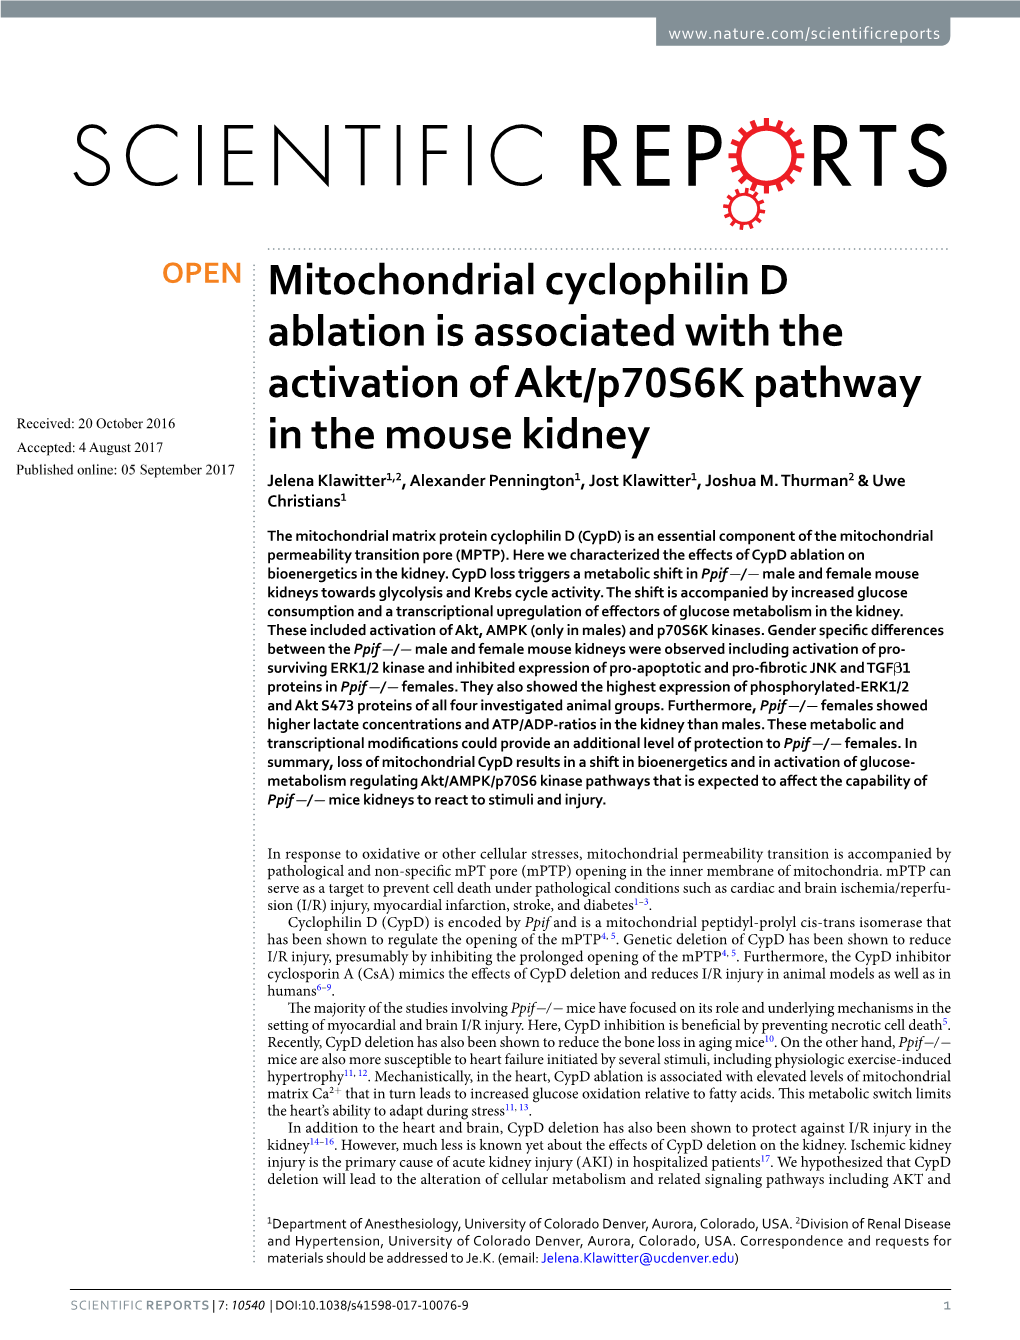 Mitochondrial Cyclophilin D Ablation Is Associated with the Activation of Akt